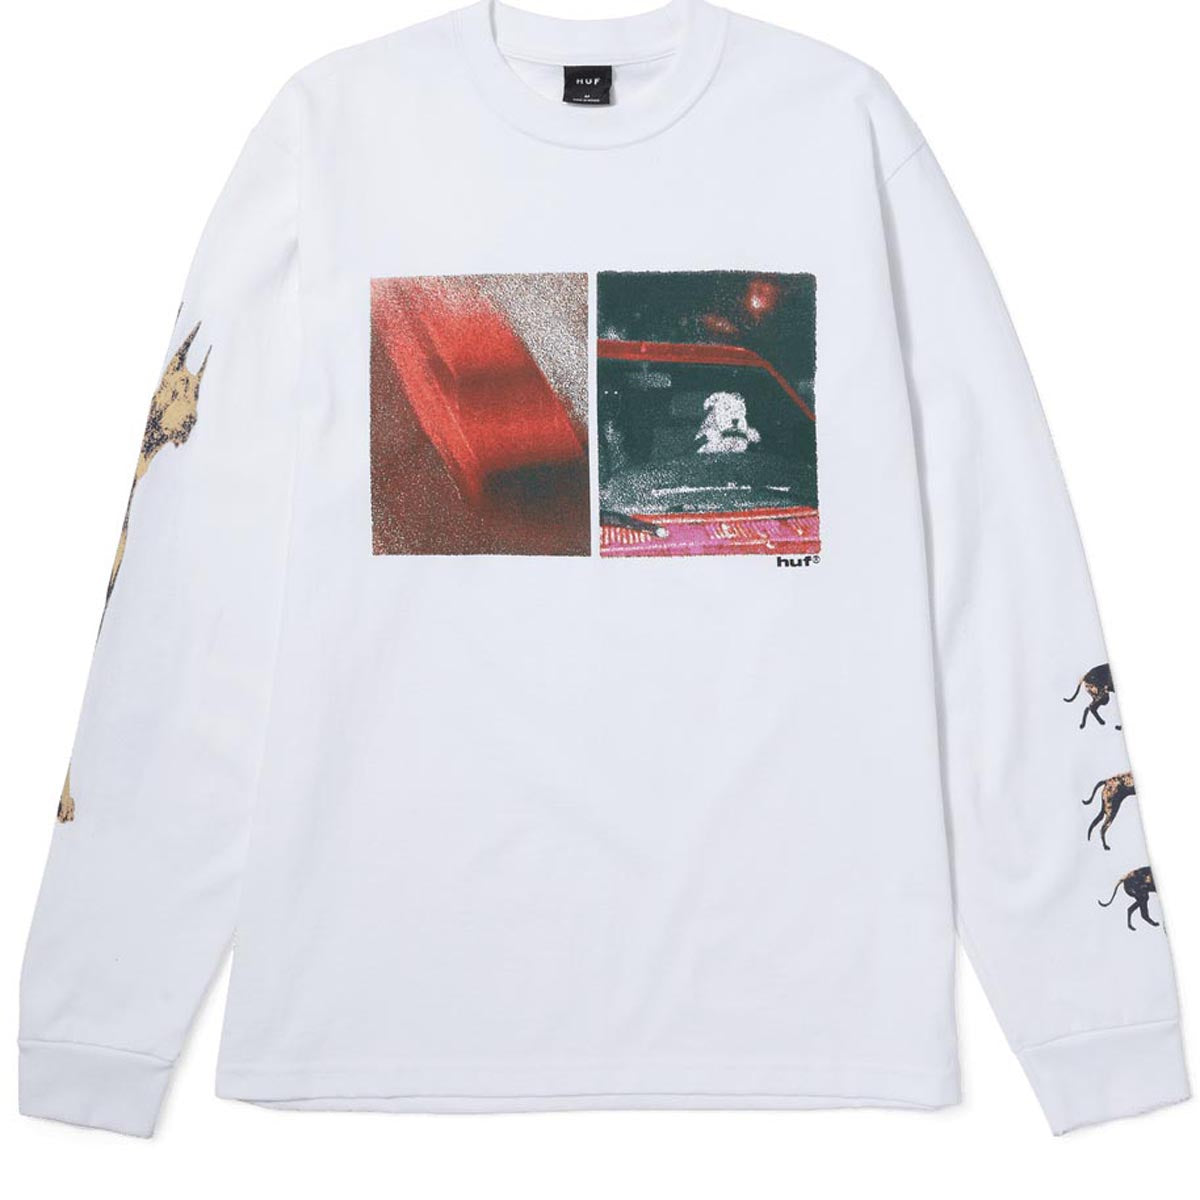 HUF Red Means Go Long Sleeve T-Shirt - White image 1